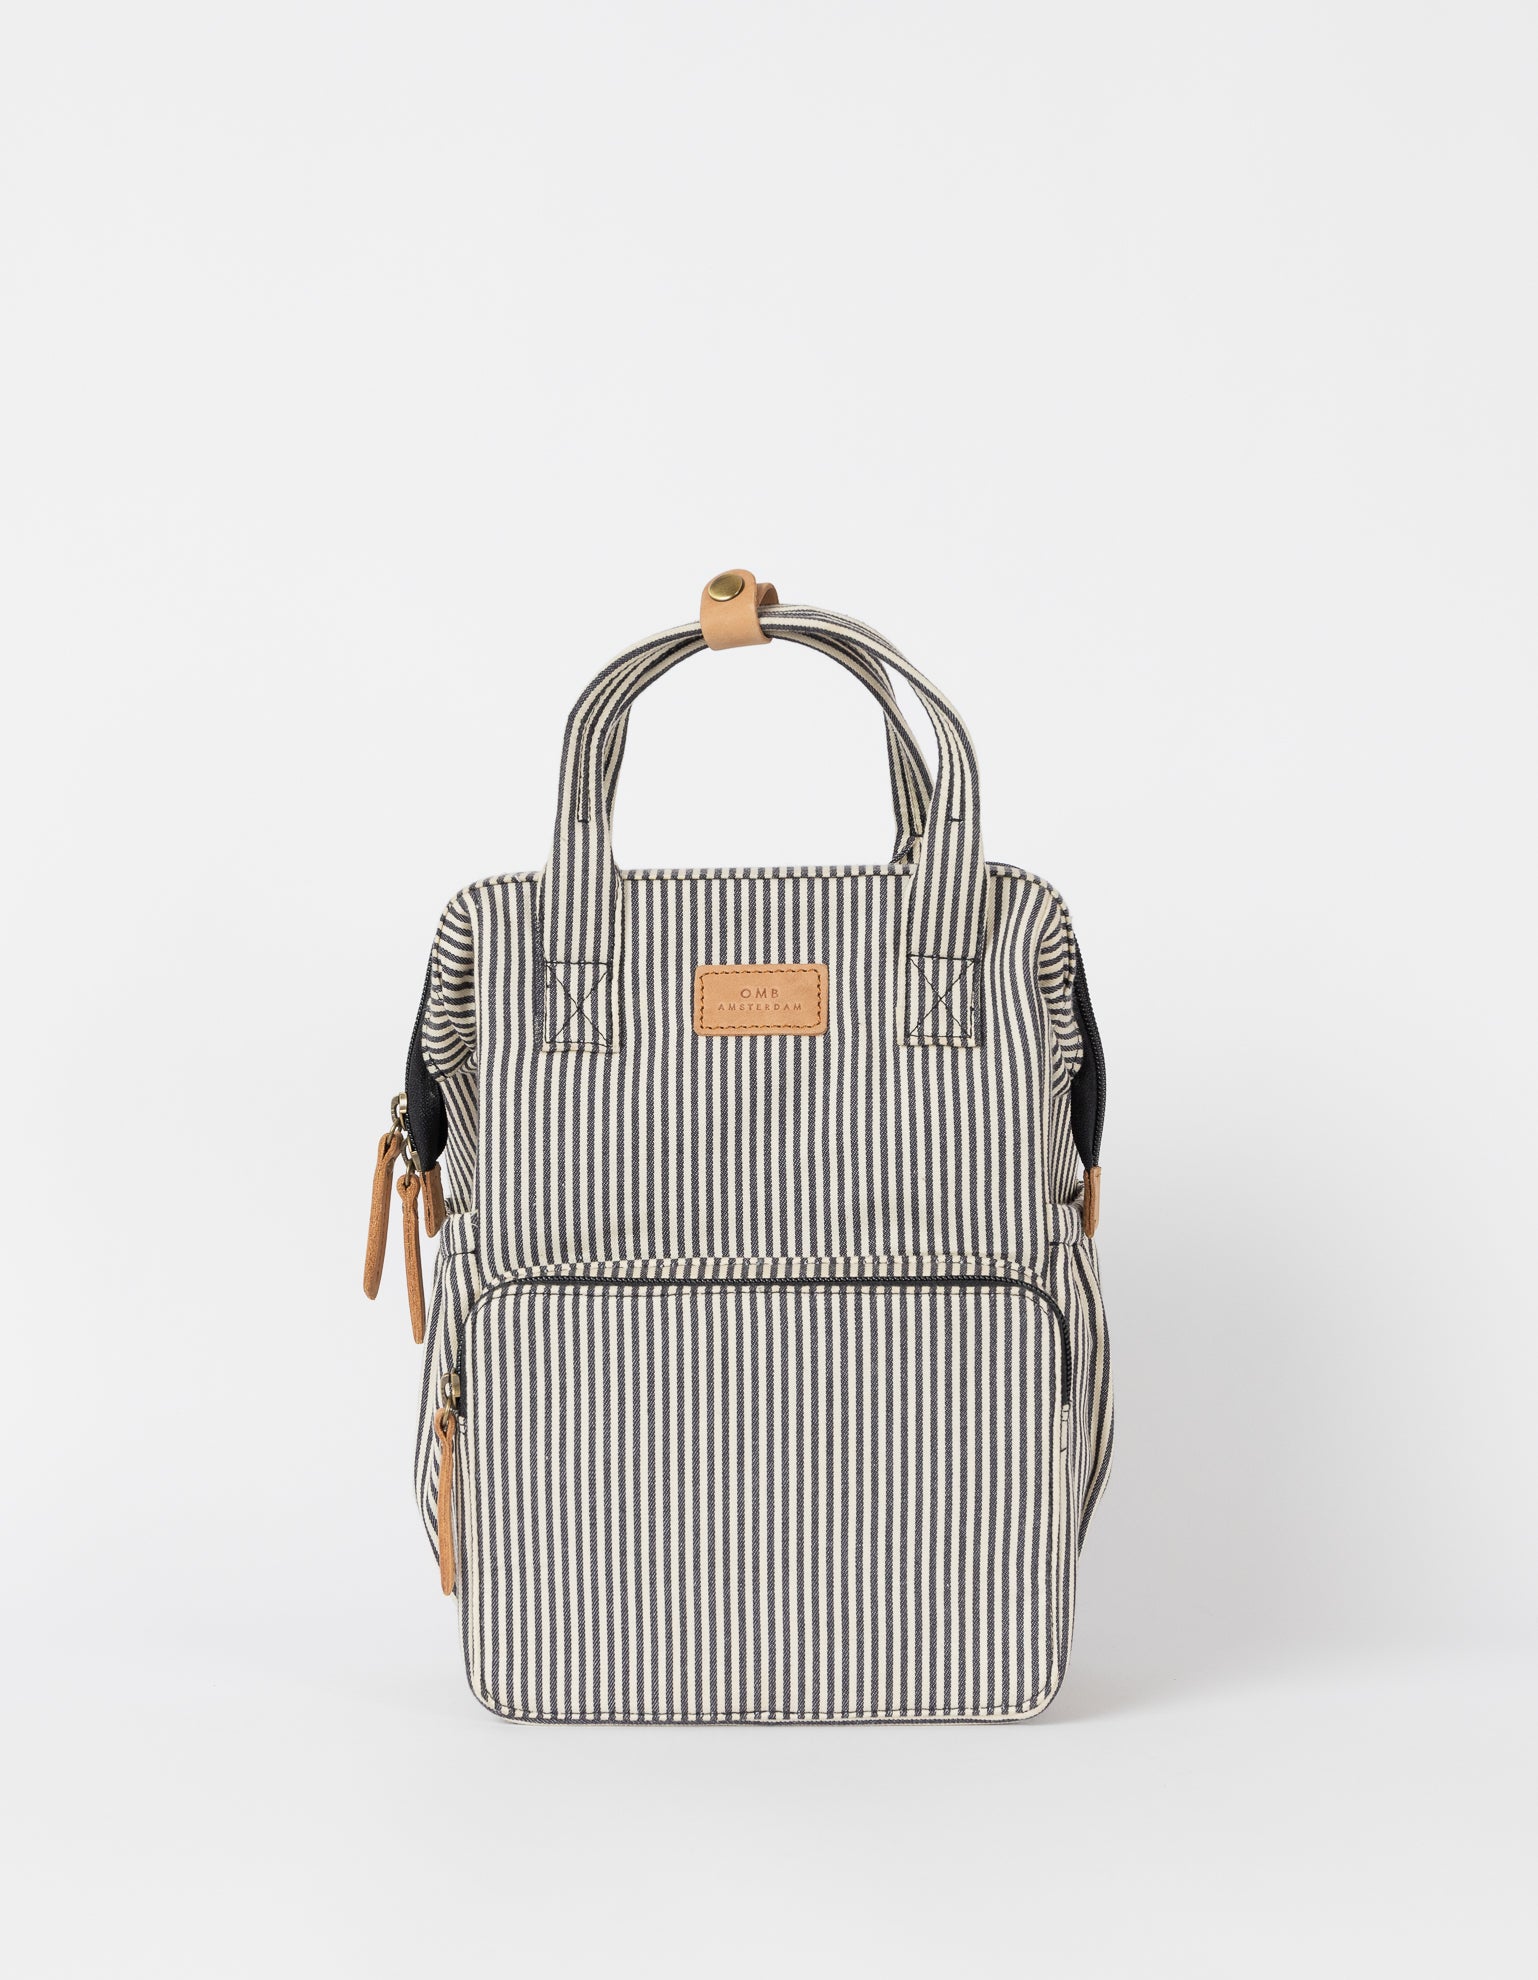 Billie Junior Backpack - Signature Lining & Camel Leather - Front product image